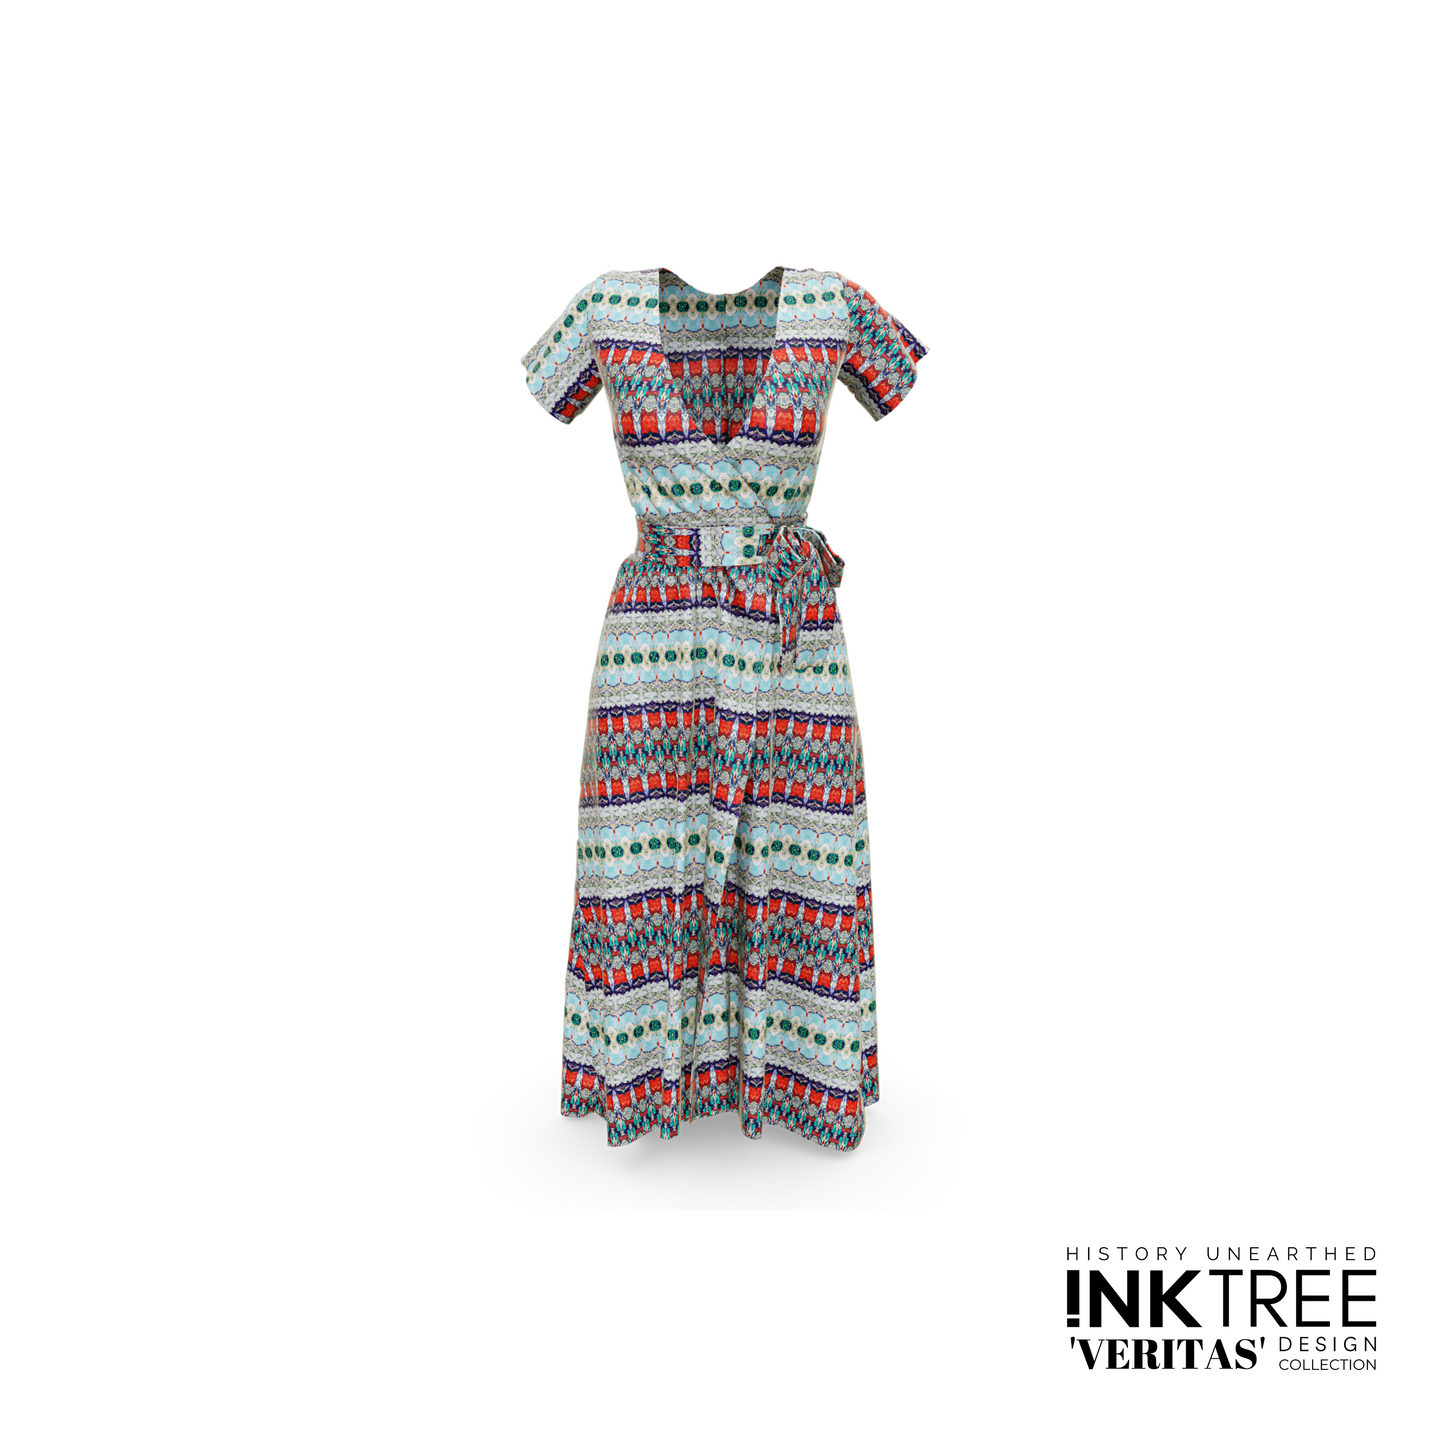 A dress with a red, blue and green horizontal line pattern on a white background.